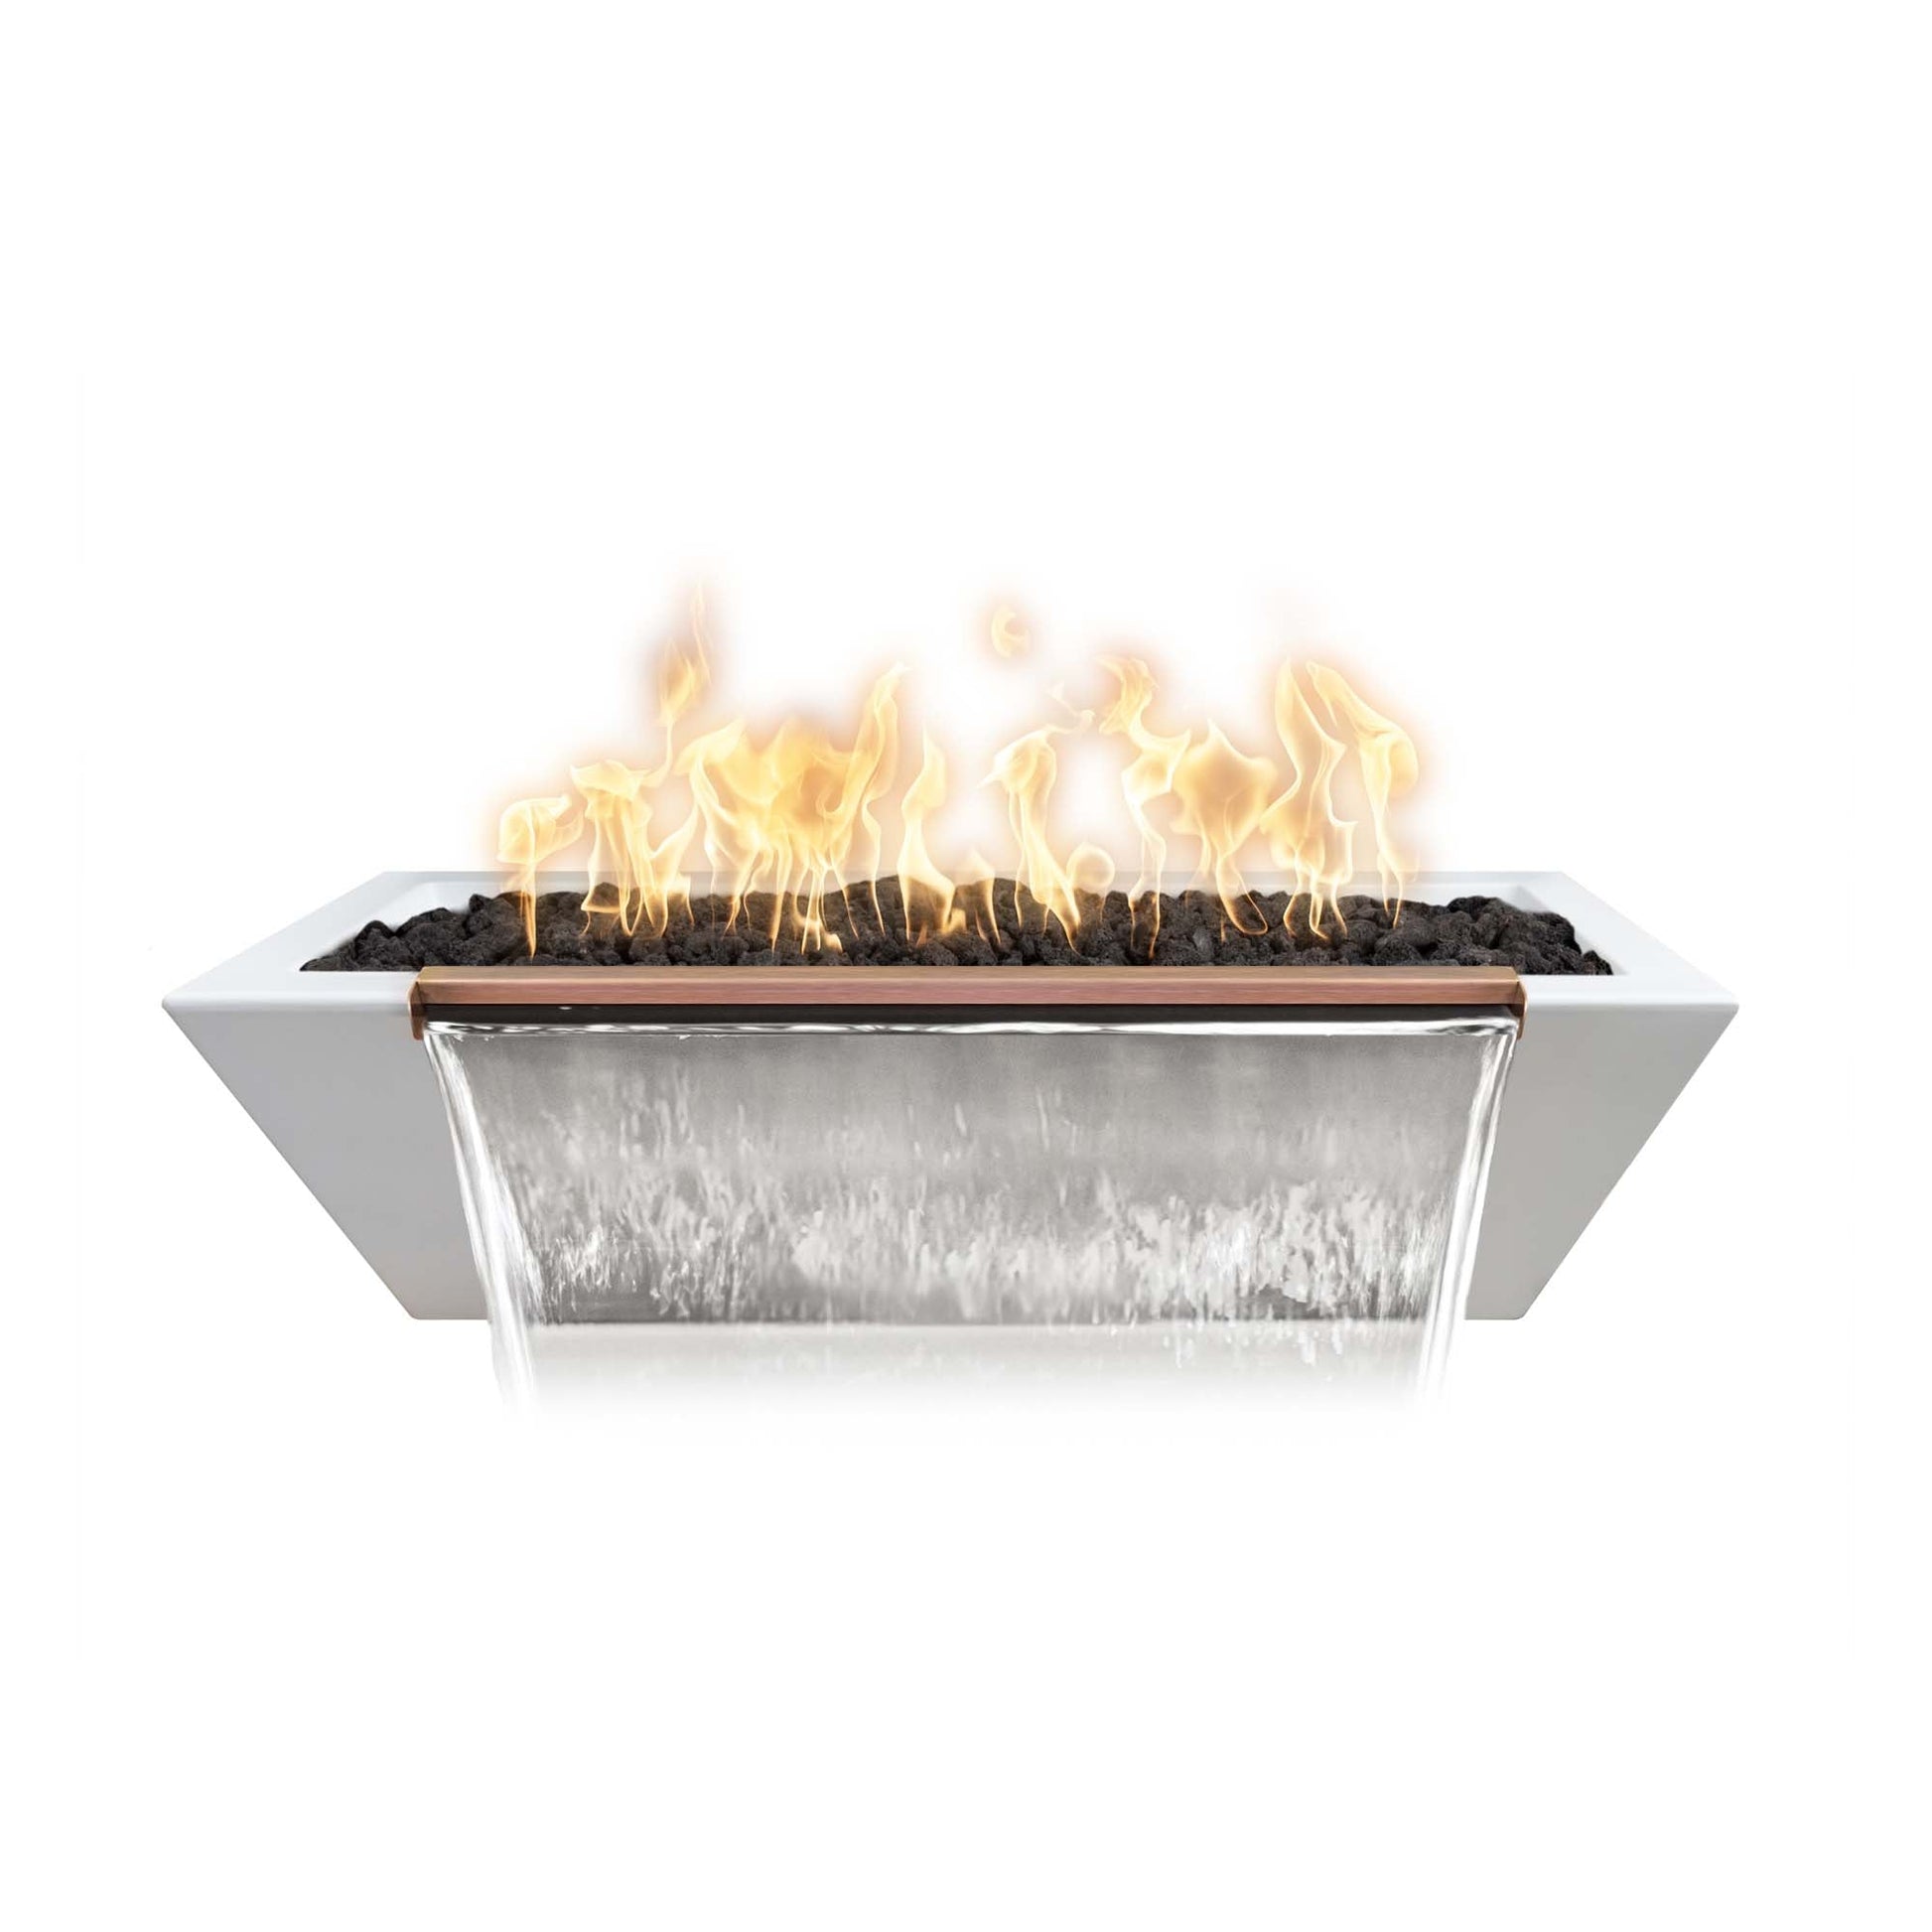 The Outdoor Plus Linear Maya 72" Black GFRC Concrete Liquid Propane Fire & Water Bowl with Match Lit Ignition